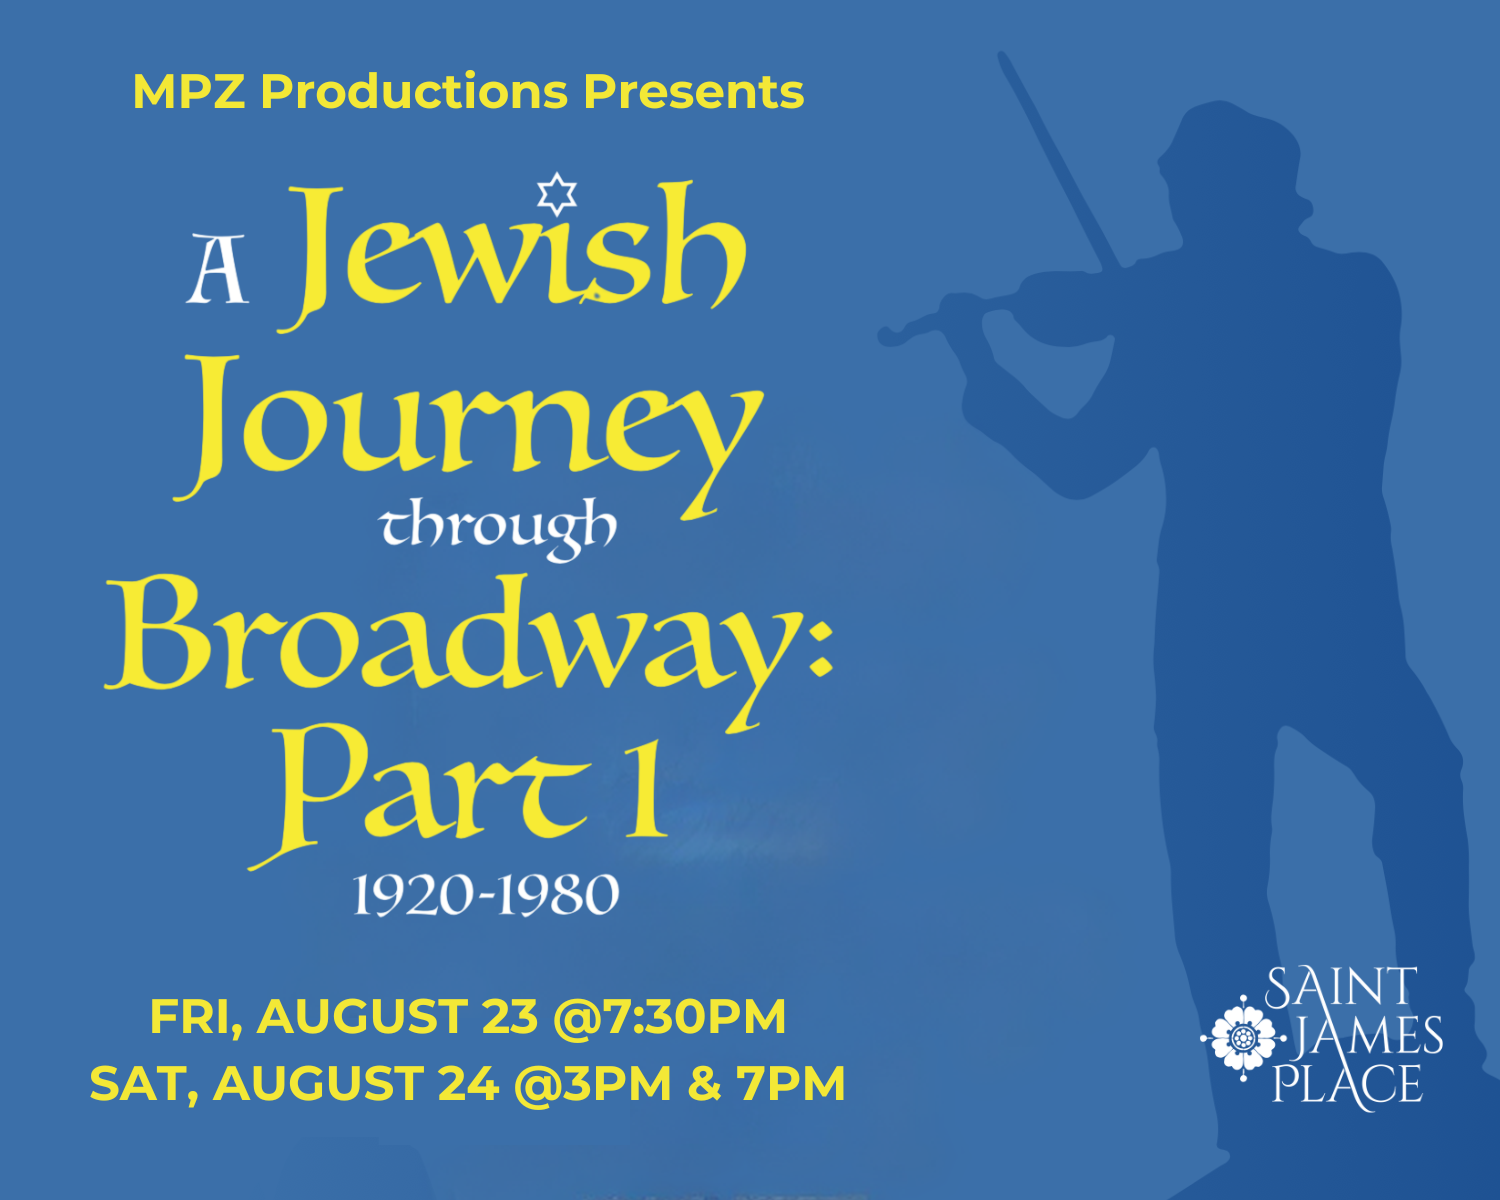 MPZ Productions Presents A Jewish Journey Through Broadway